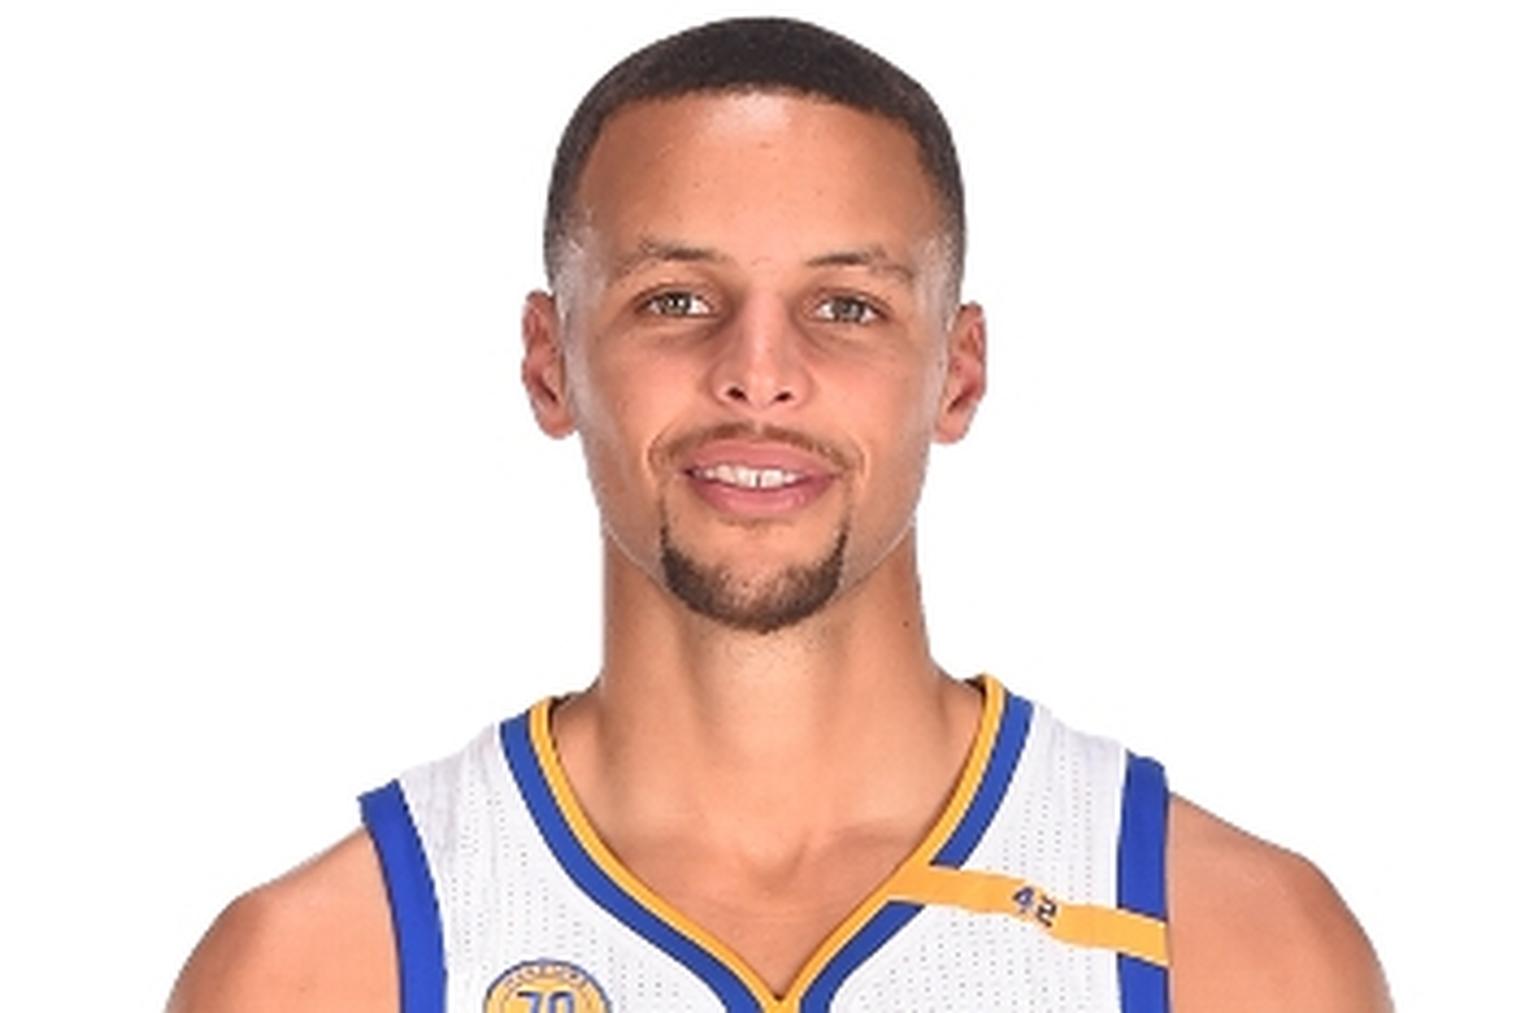 NBA superstar Steph Curry to speak in March 1 Convocation